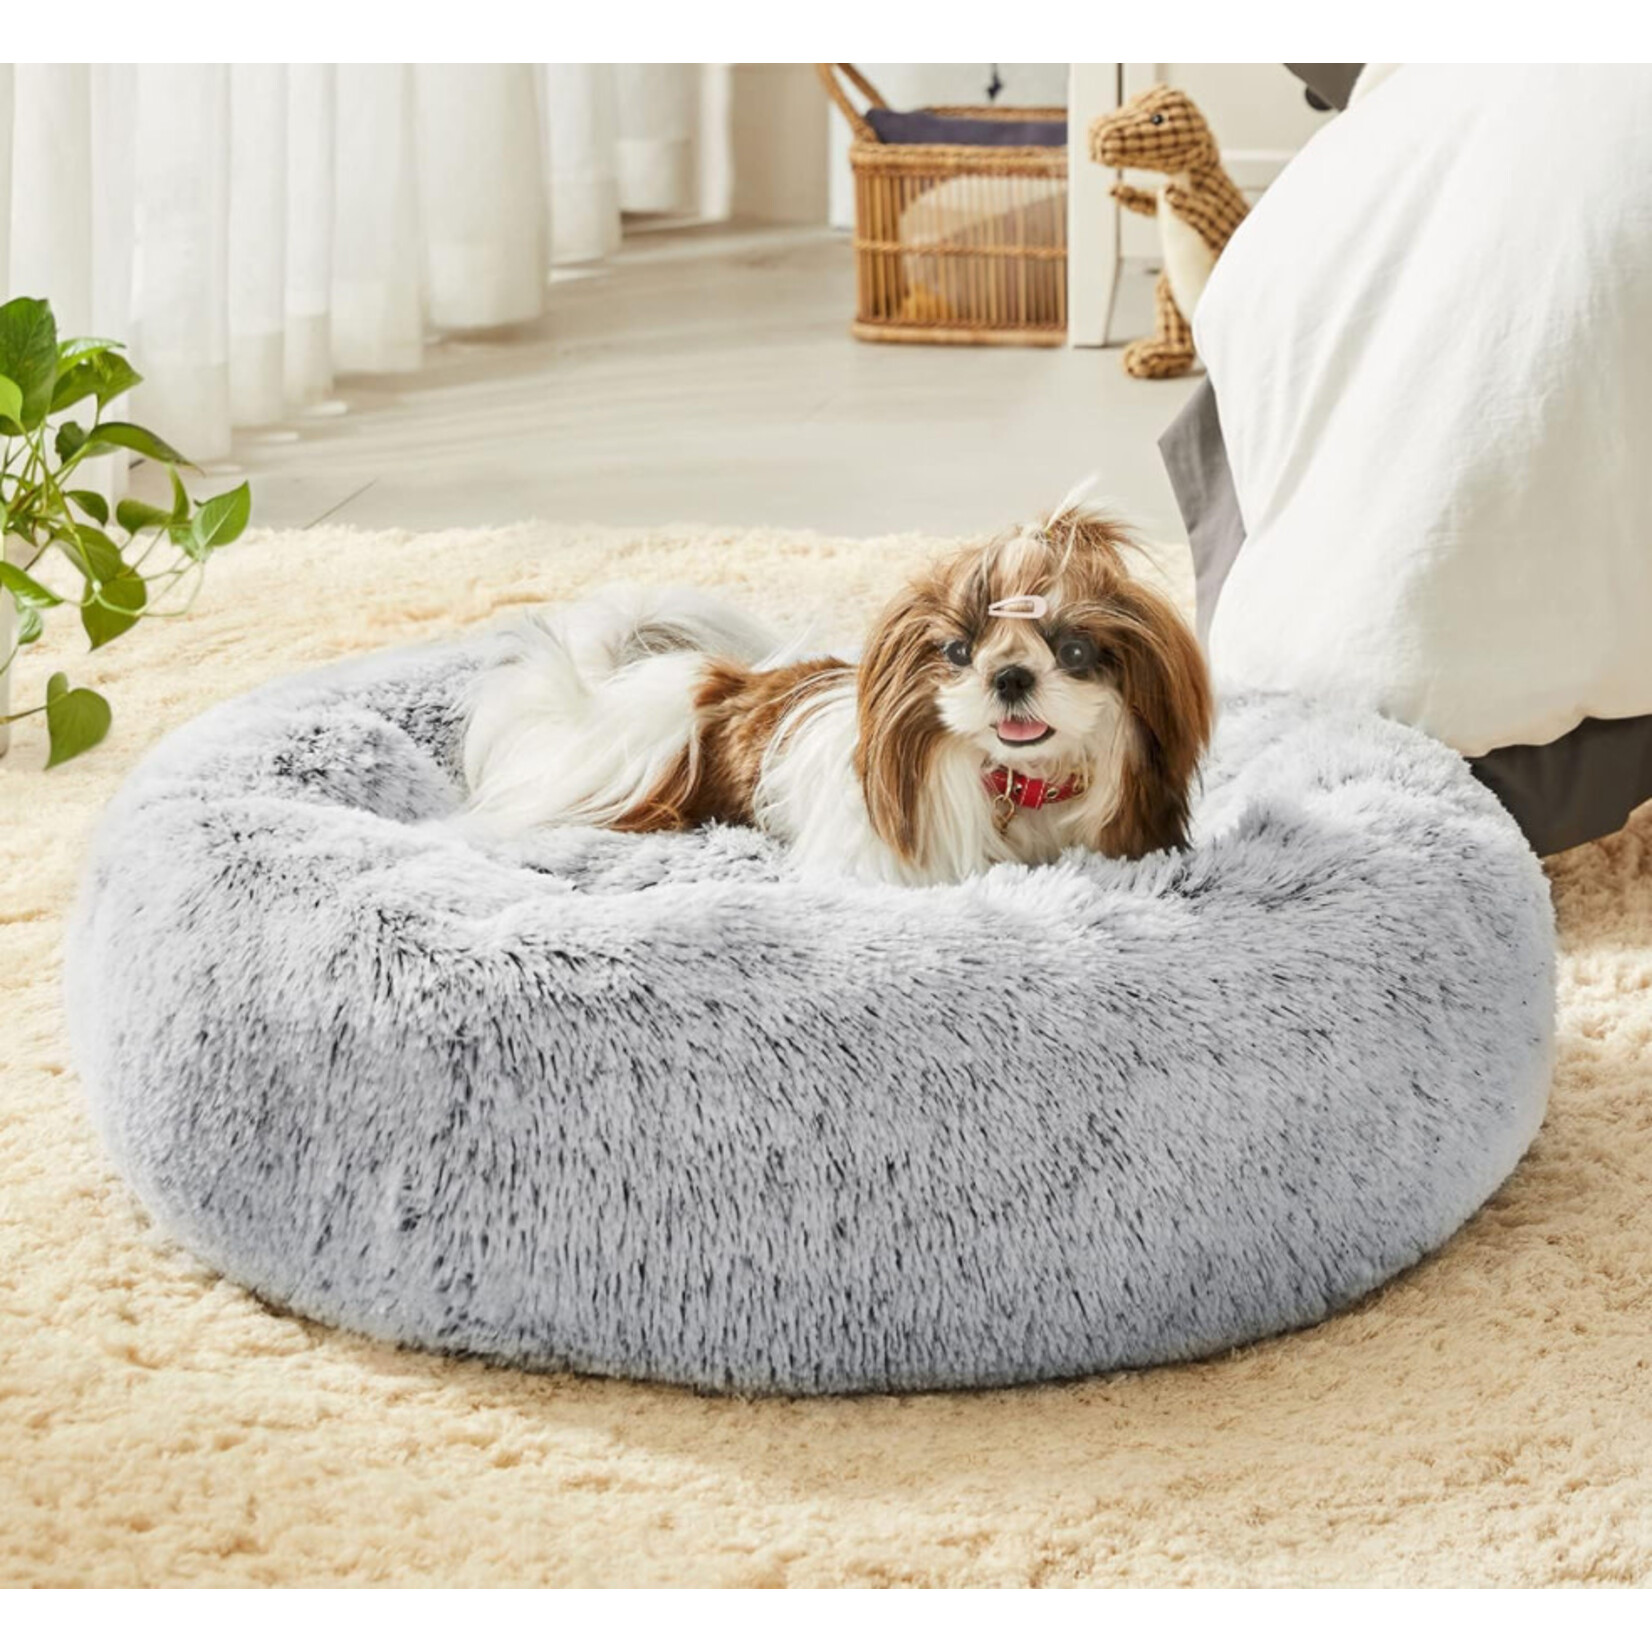 Discount Central Western home dog bed